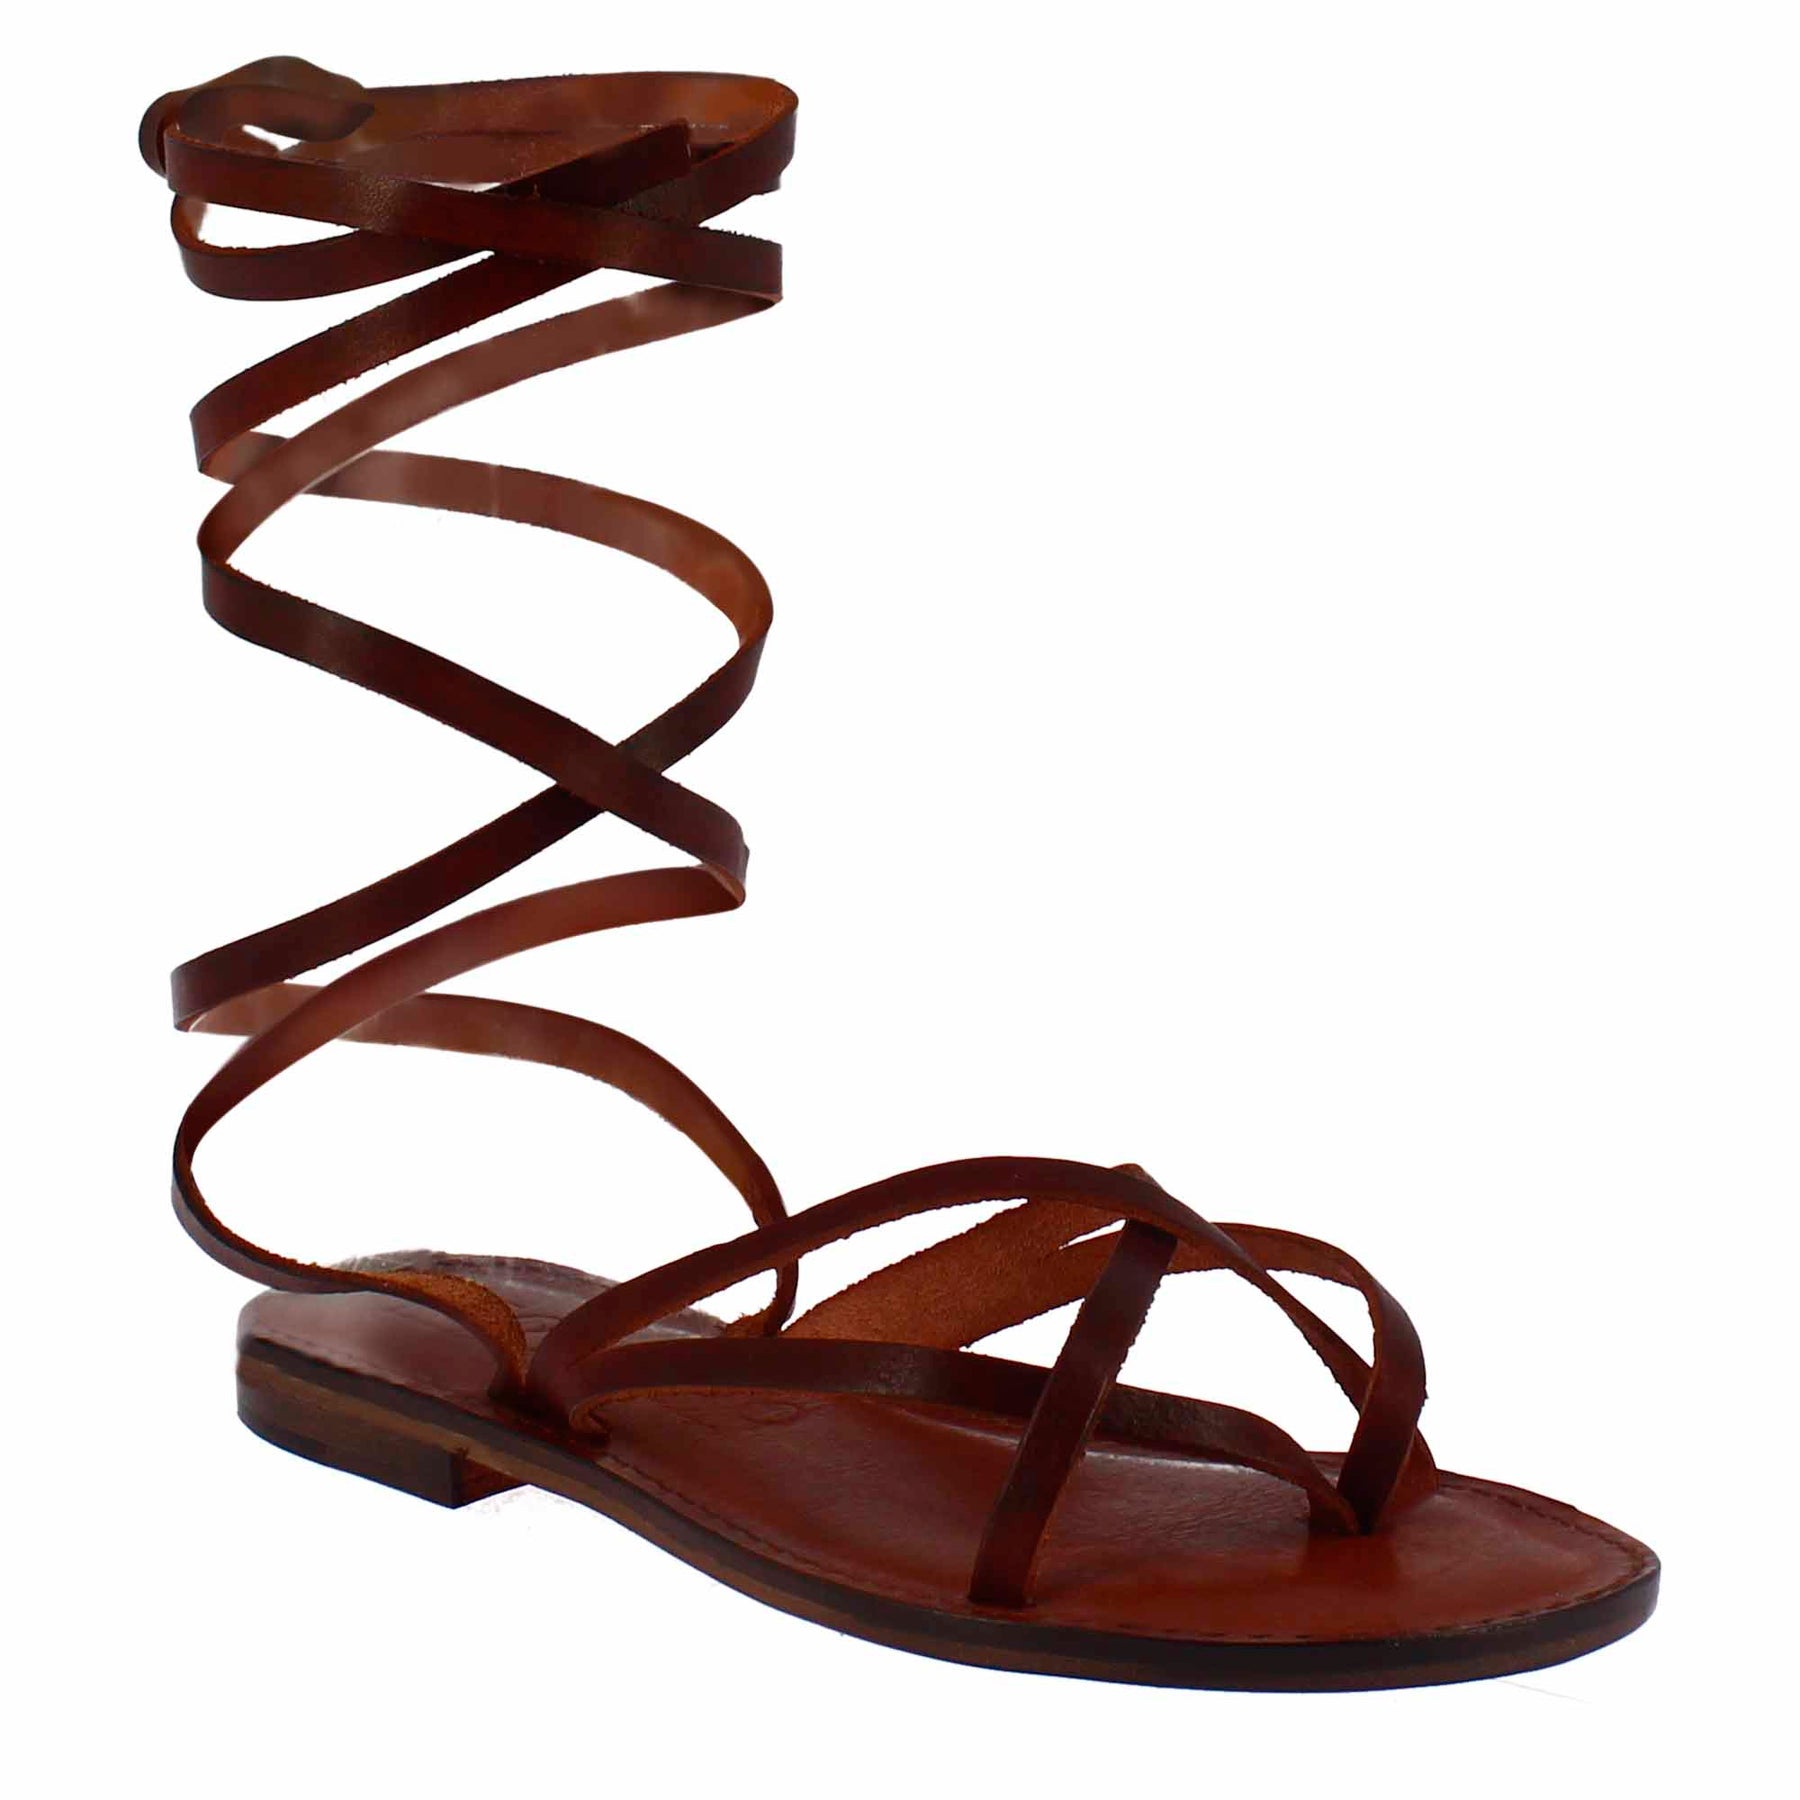 Ancient Roman style women's Eclipse sandals in brown leather